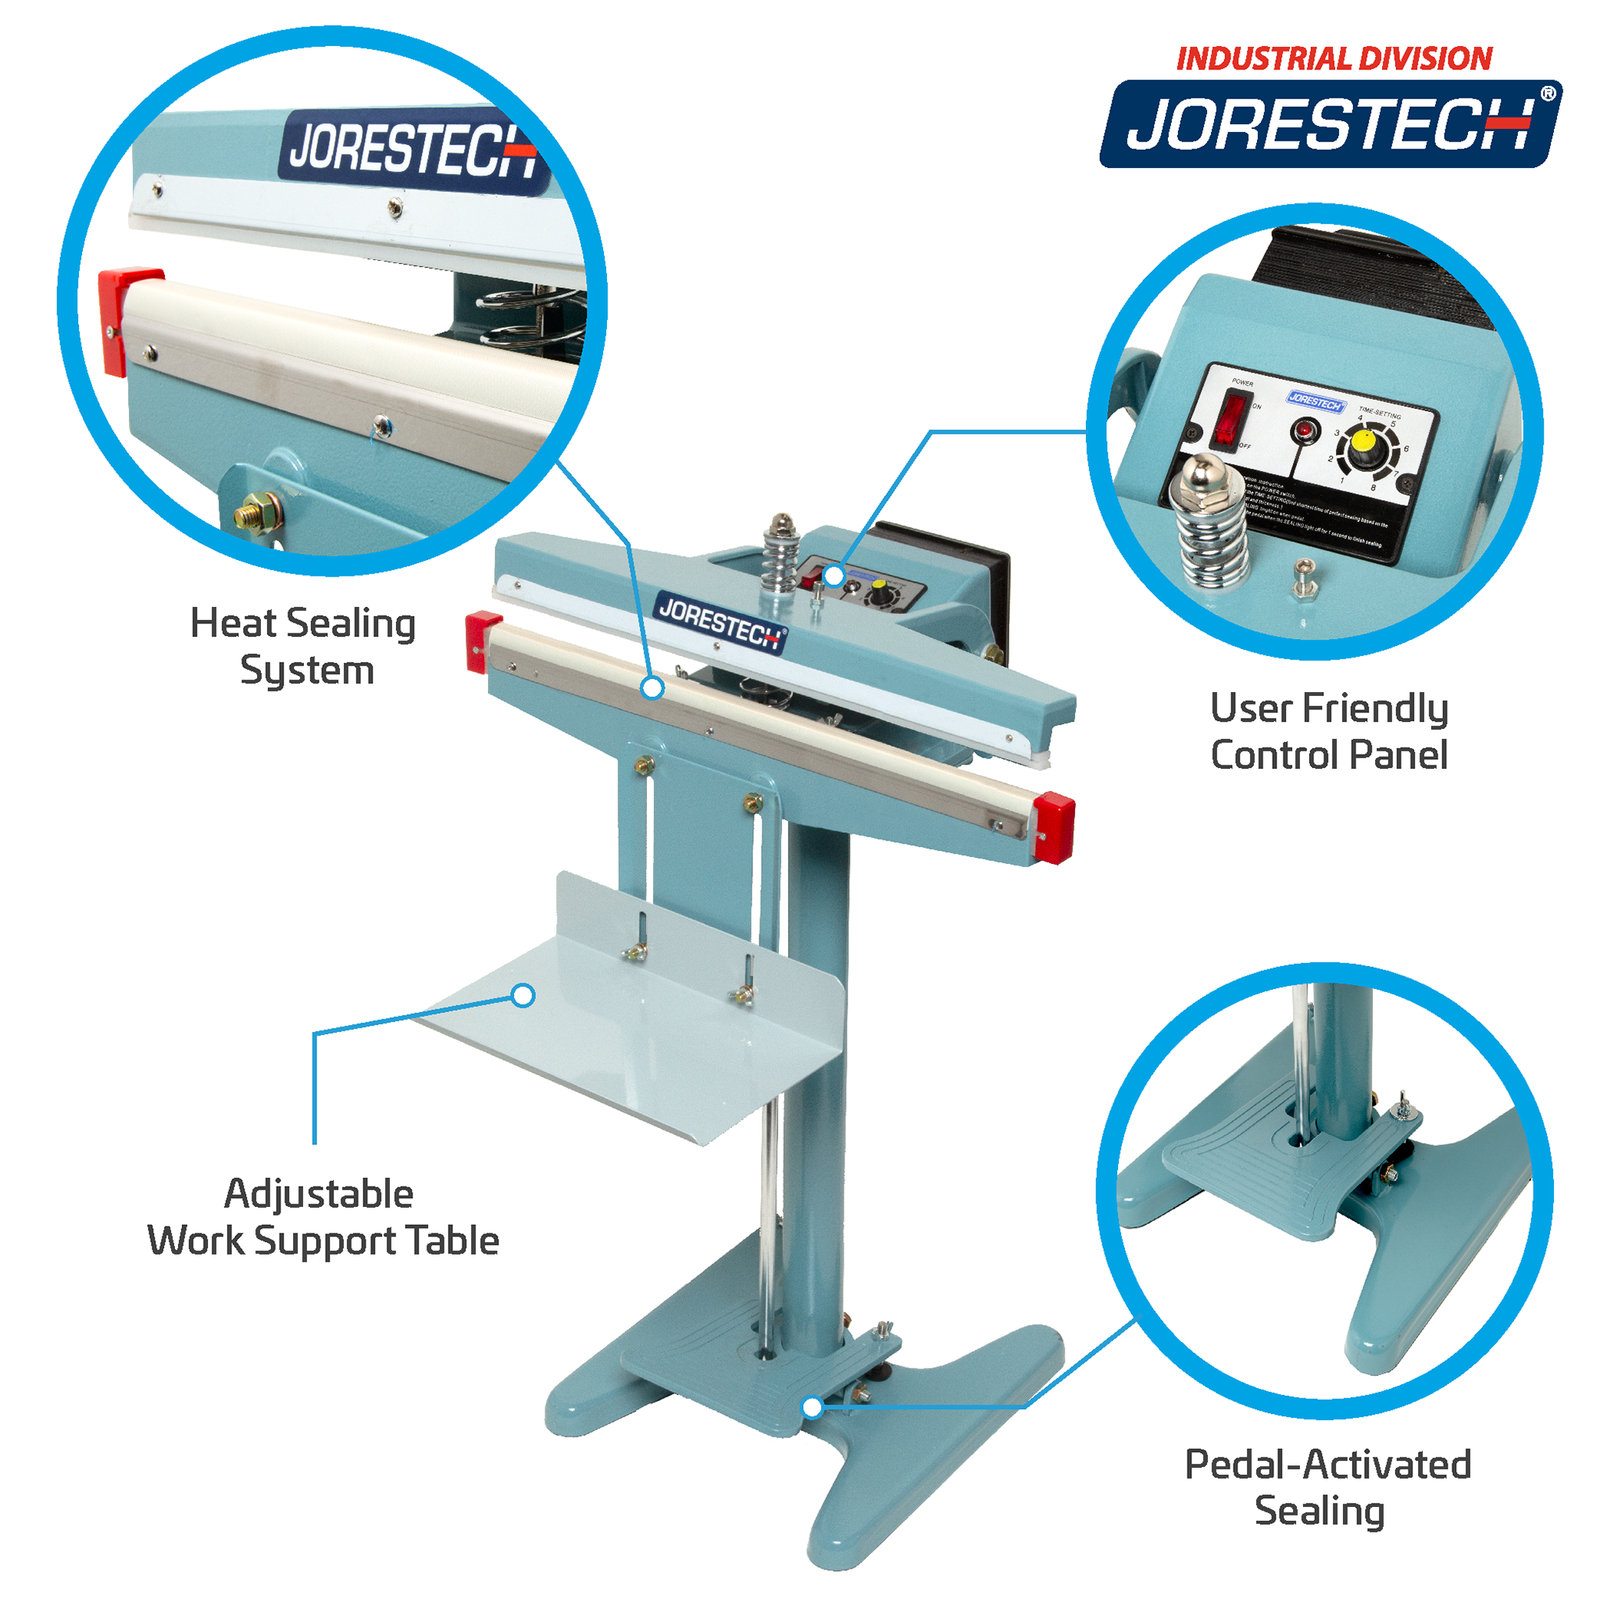 Infographic shows blue JORES TECHNOLOGIES® foot impulse bag sealer over white background. Highlighted features include Heat Sealing System, User Friendly Control Panel, Pedal-Activated Sealing, and Adjustable Work Support Table. Close-ups of sealing element, foot pedal, and control panel.